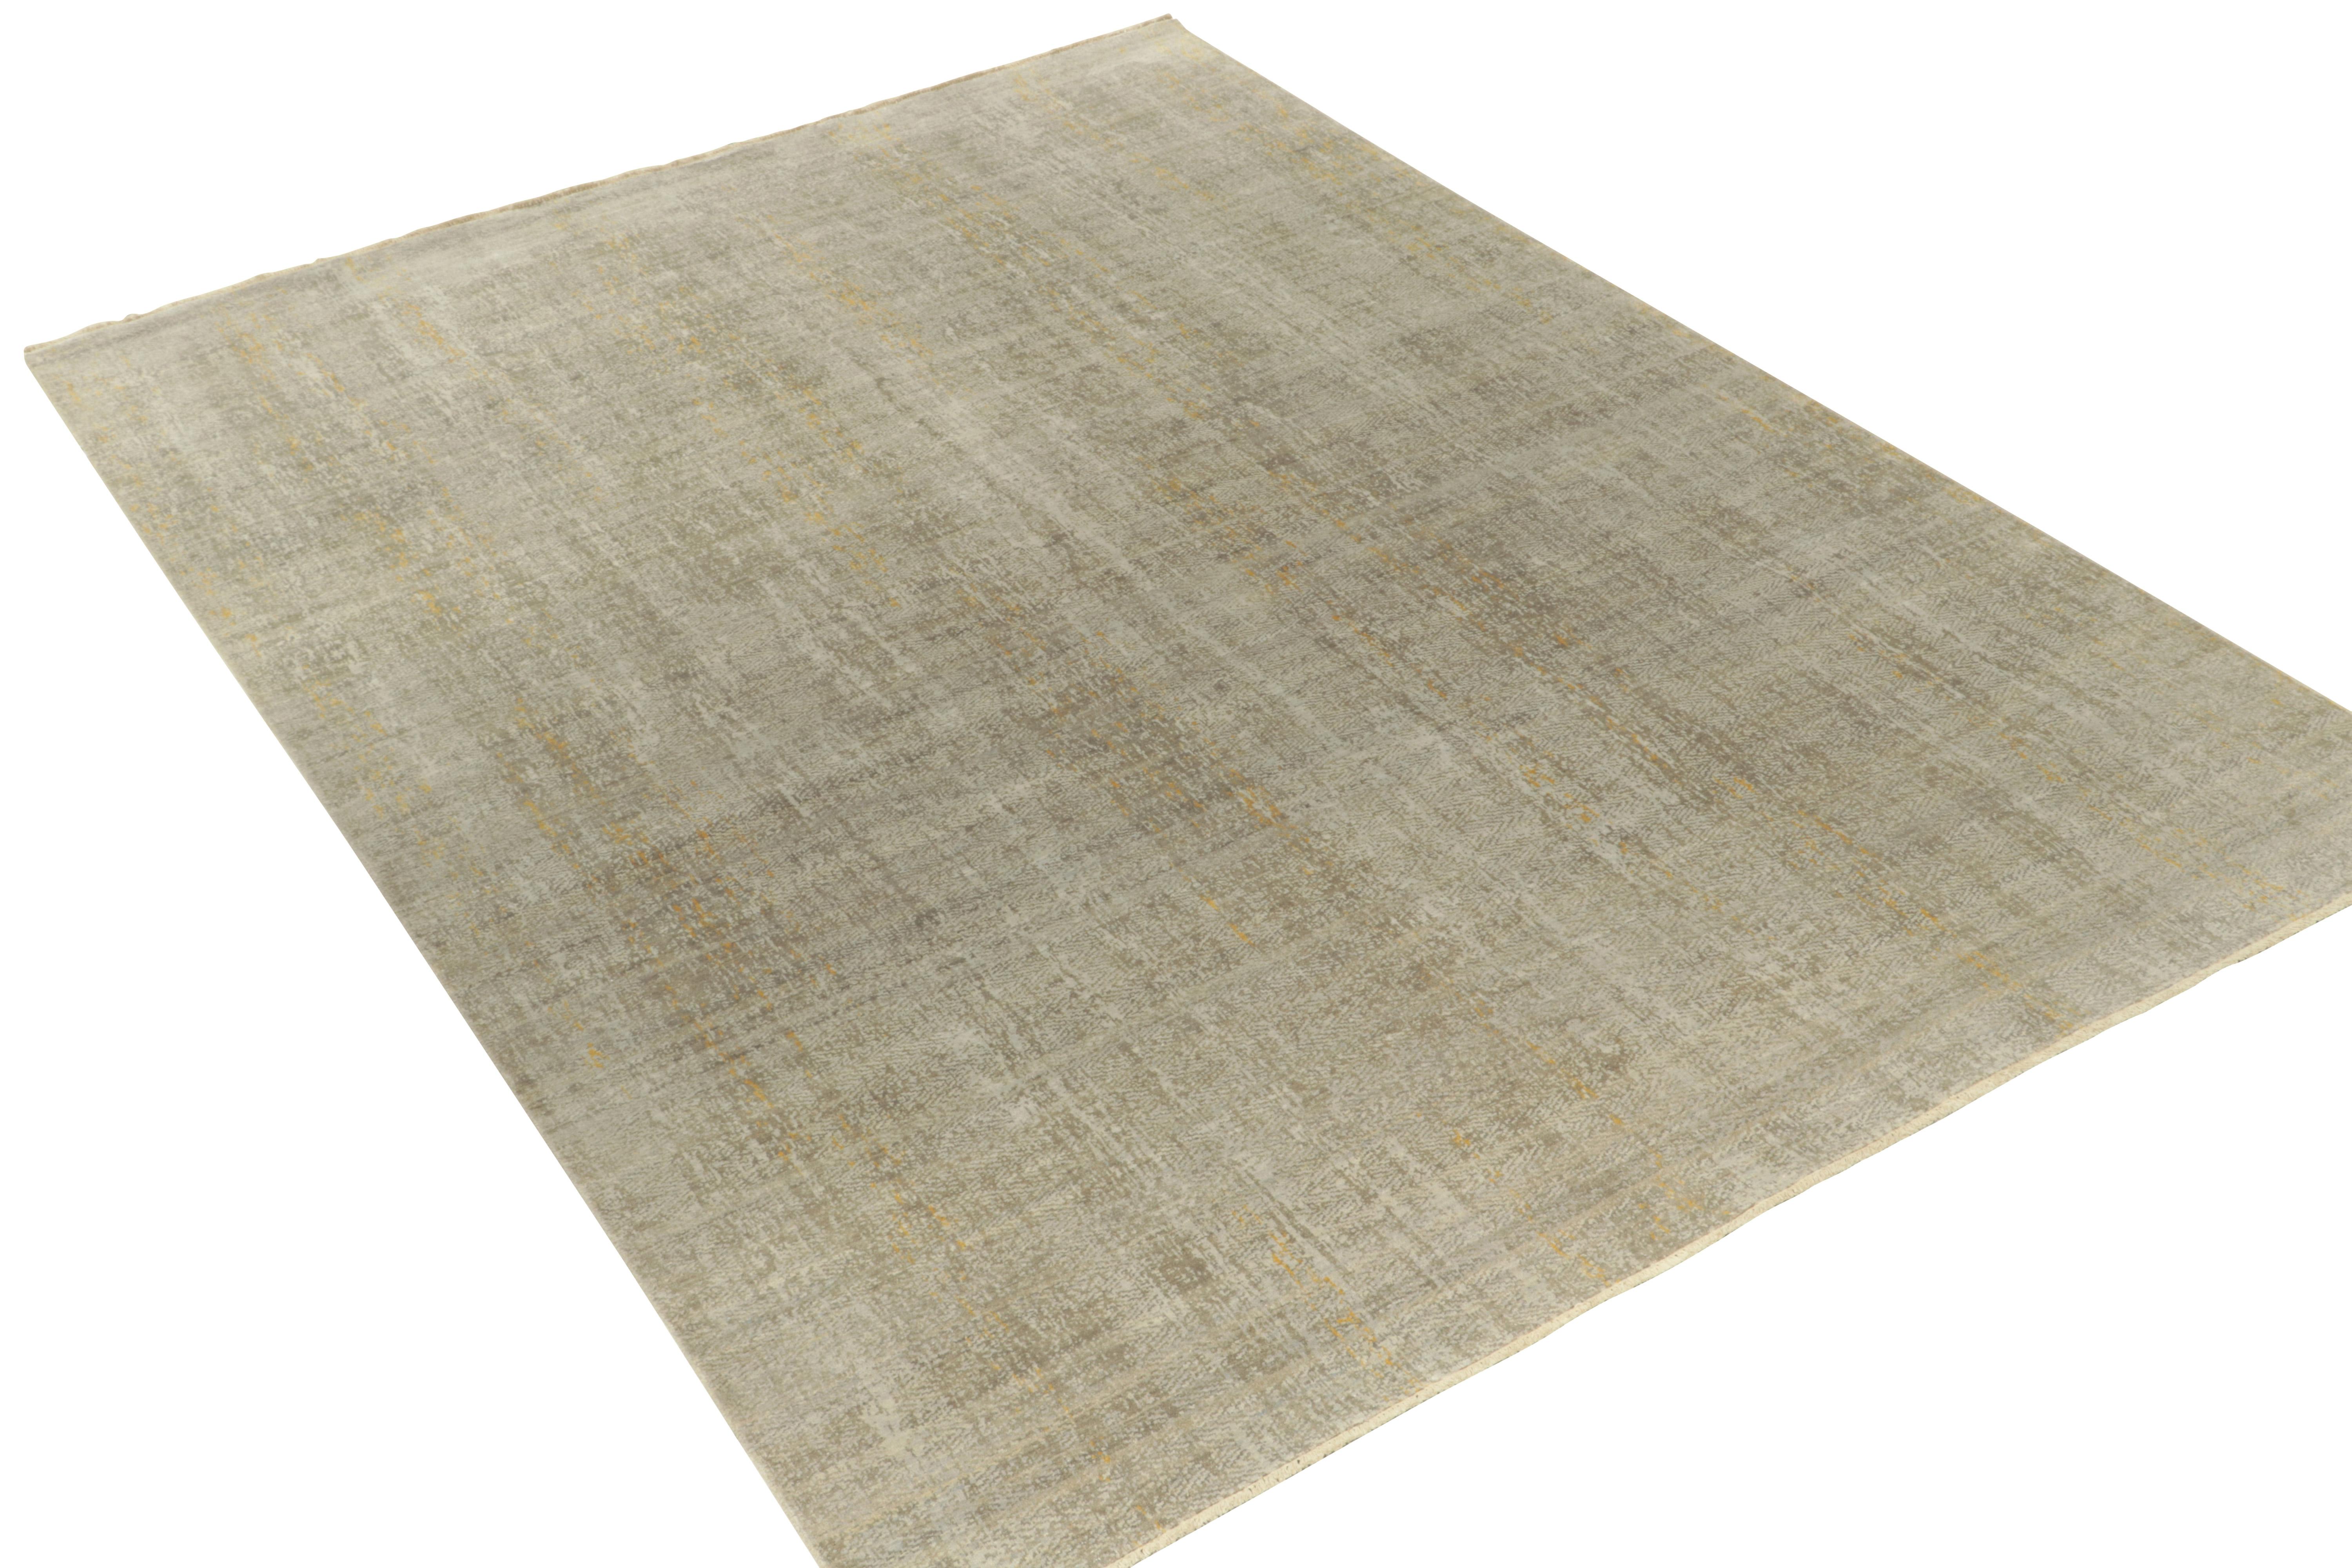 Hand knotted in fine silk, a 9x12 abstract piece from Rug & Kilim’s contemporary designs. The bold modern vision enjoys silver gray & blue with subdued gold accents lending a fabulous dimensionality in the marriage of texture and overlapping